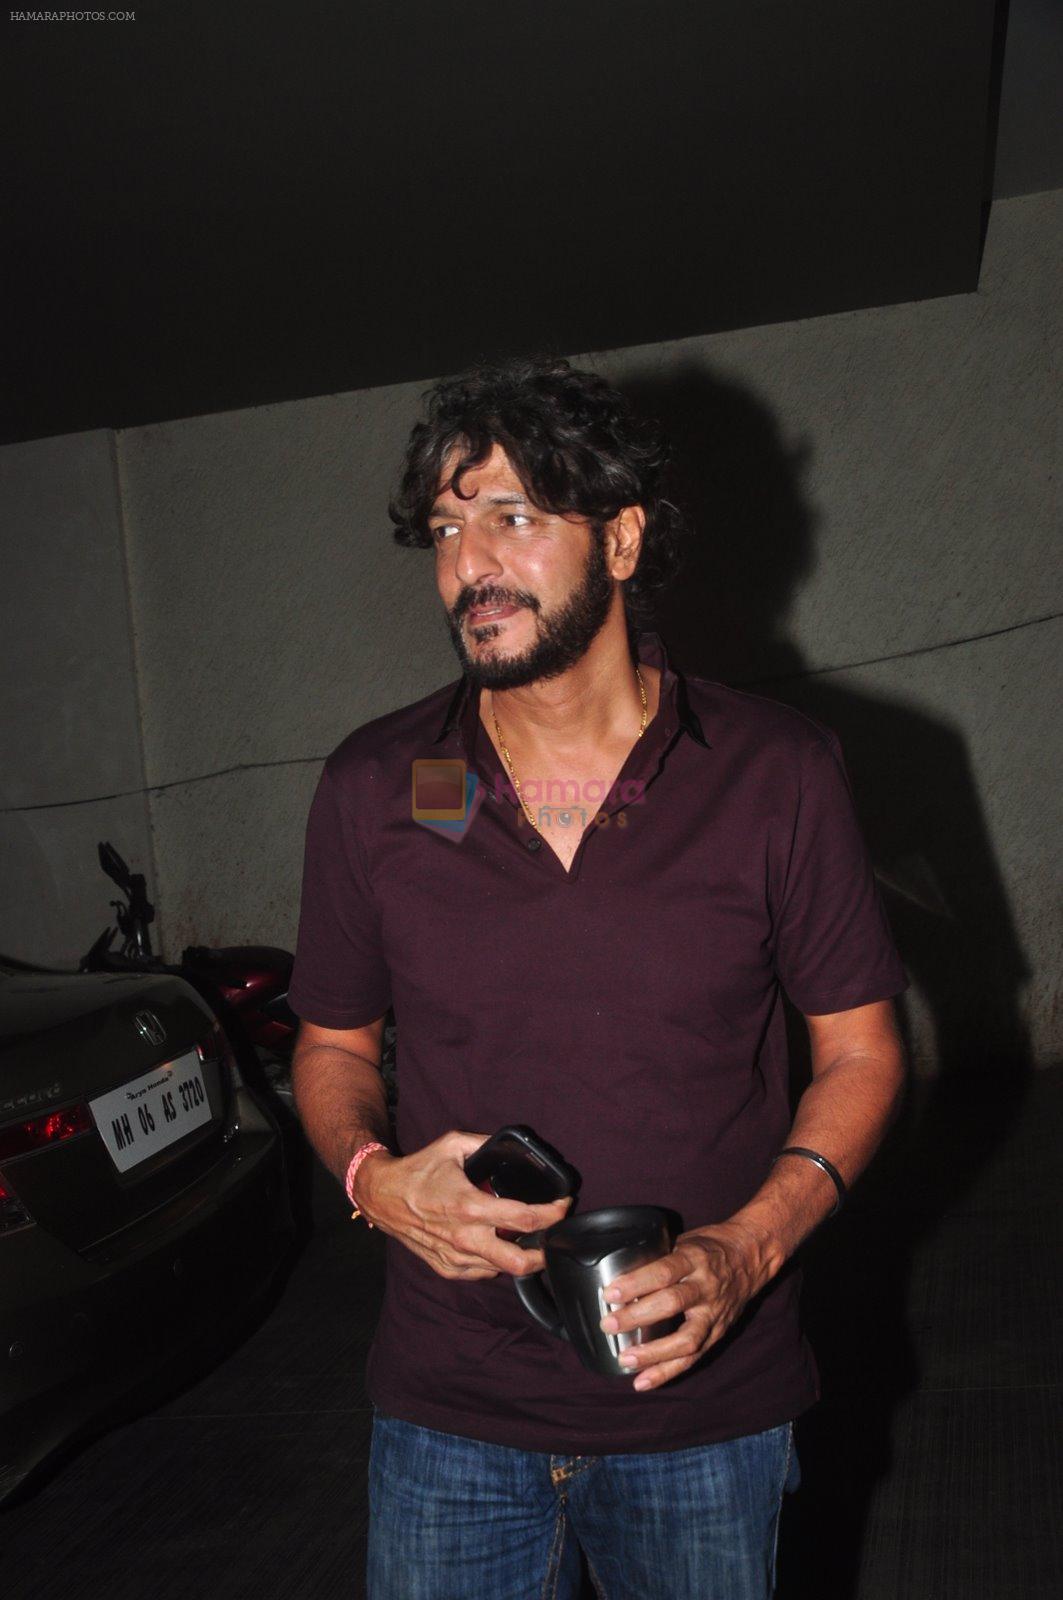 Chunky Pandey snapped at Lightbox in Mumbai on 3rd Dec 2014